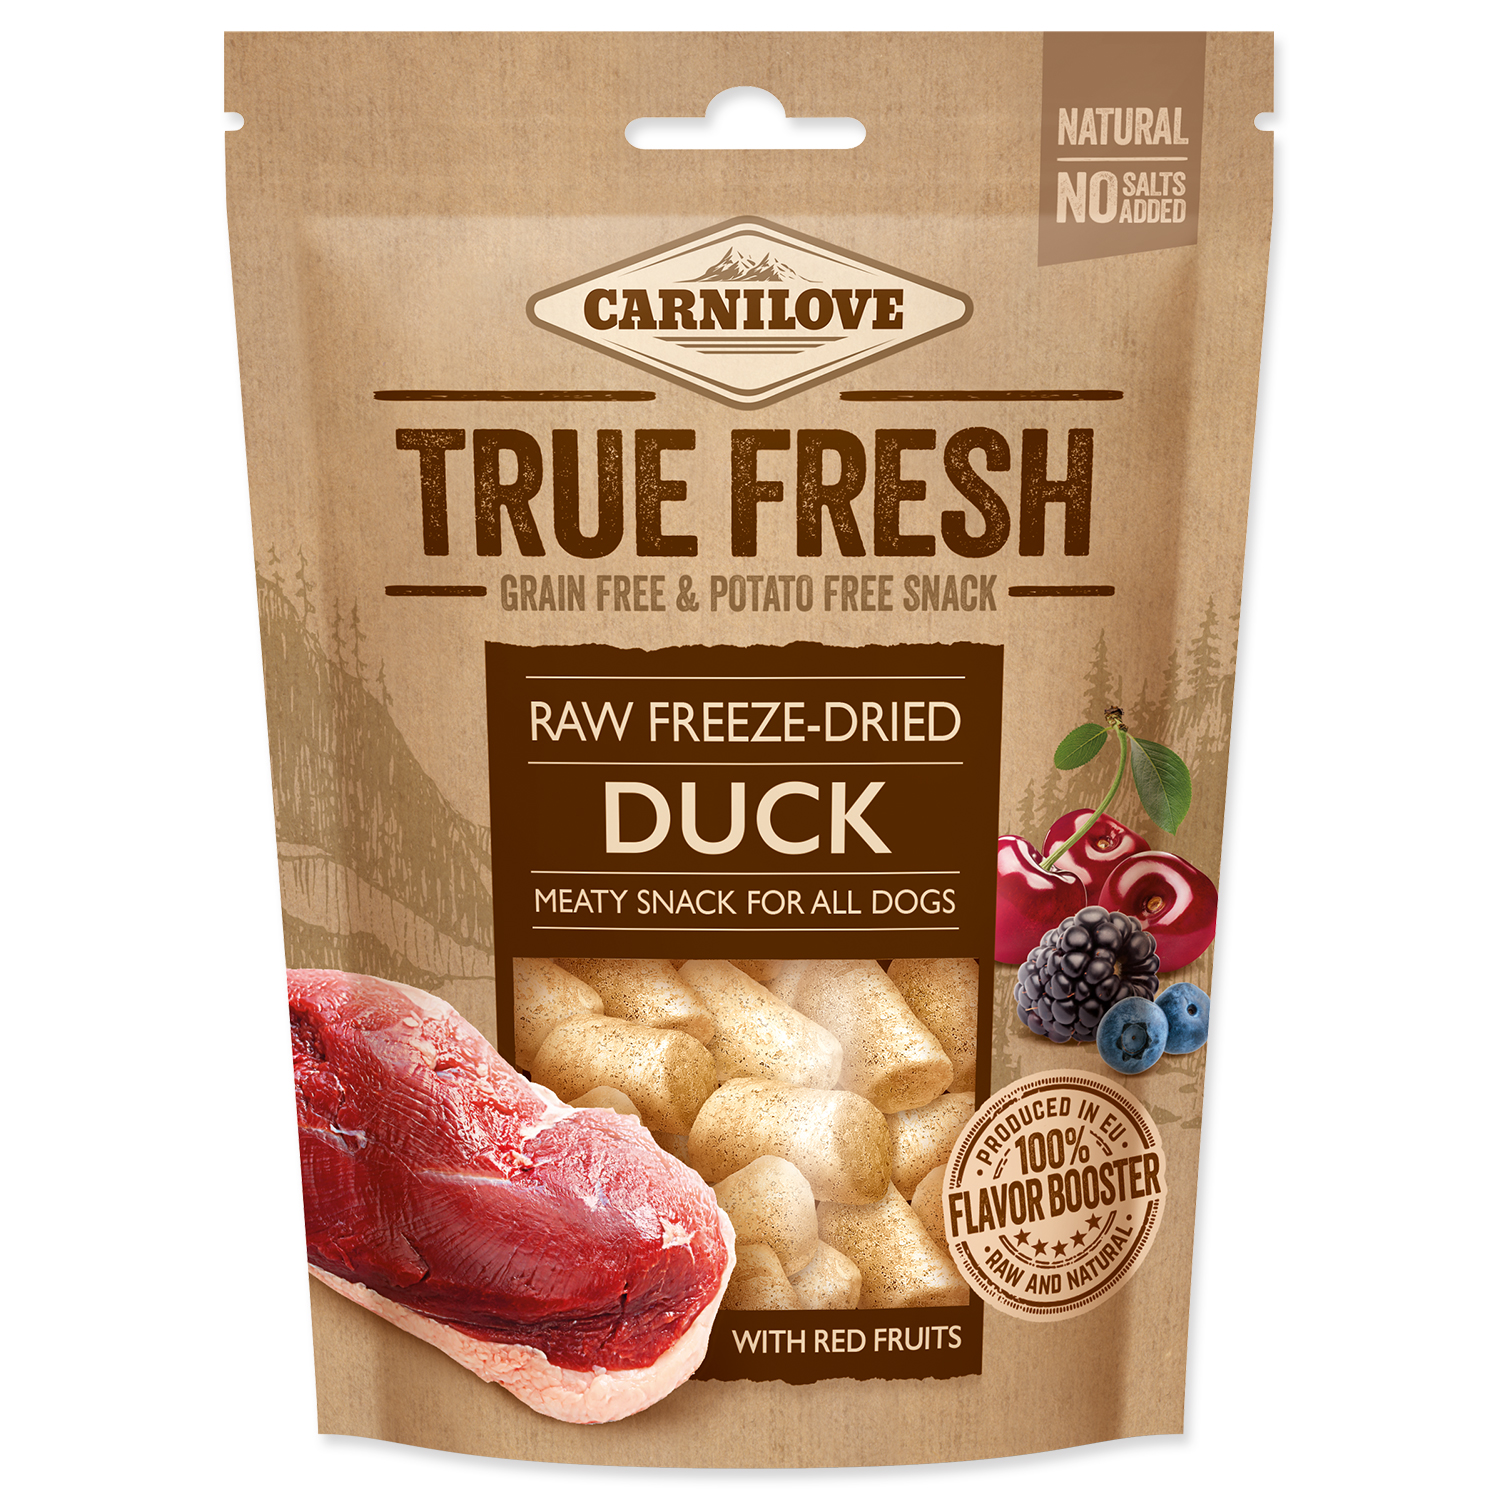 Carnilove Raw freeze-dried Duck with red fruits